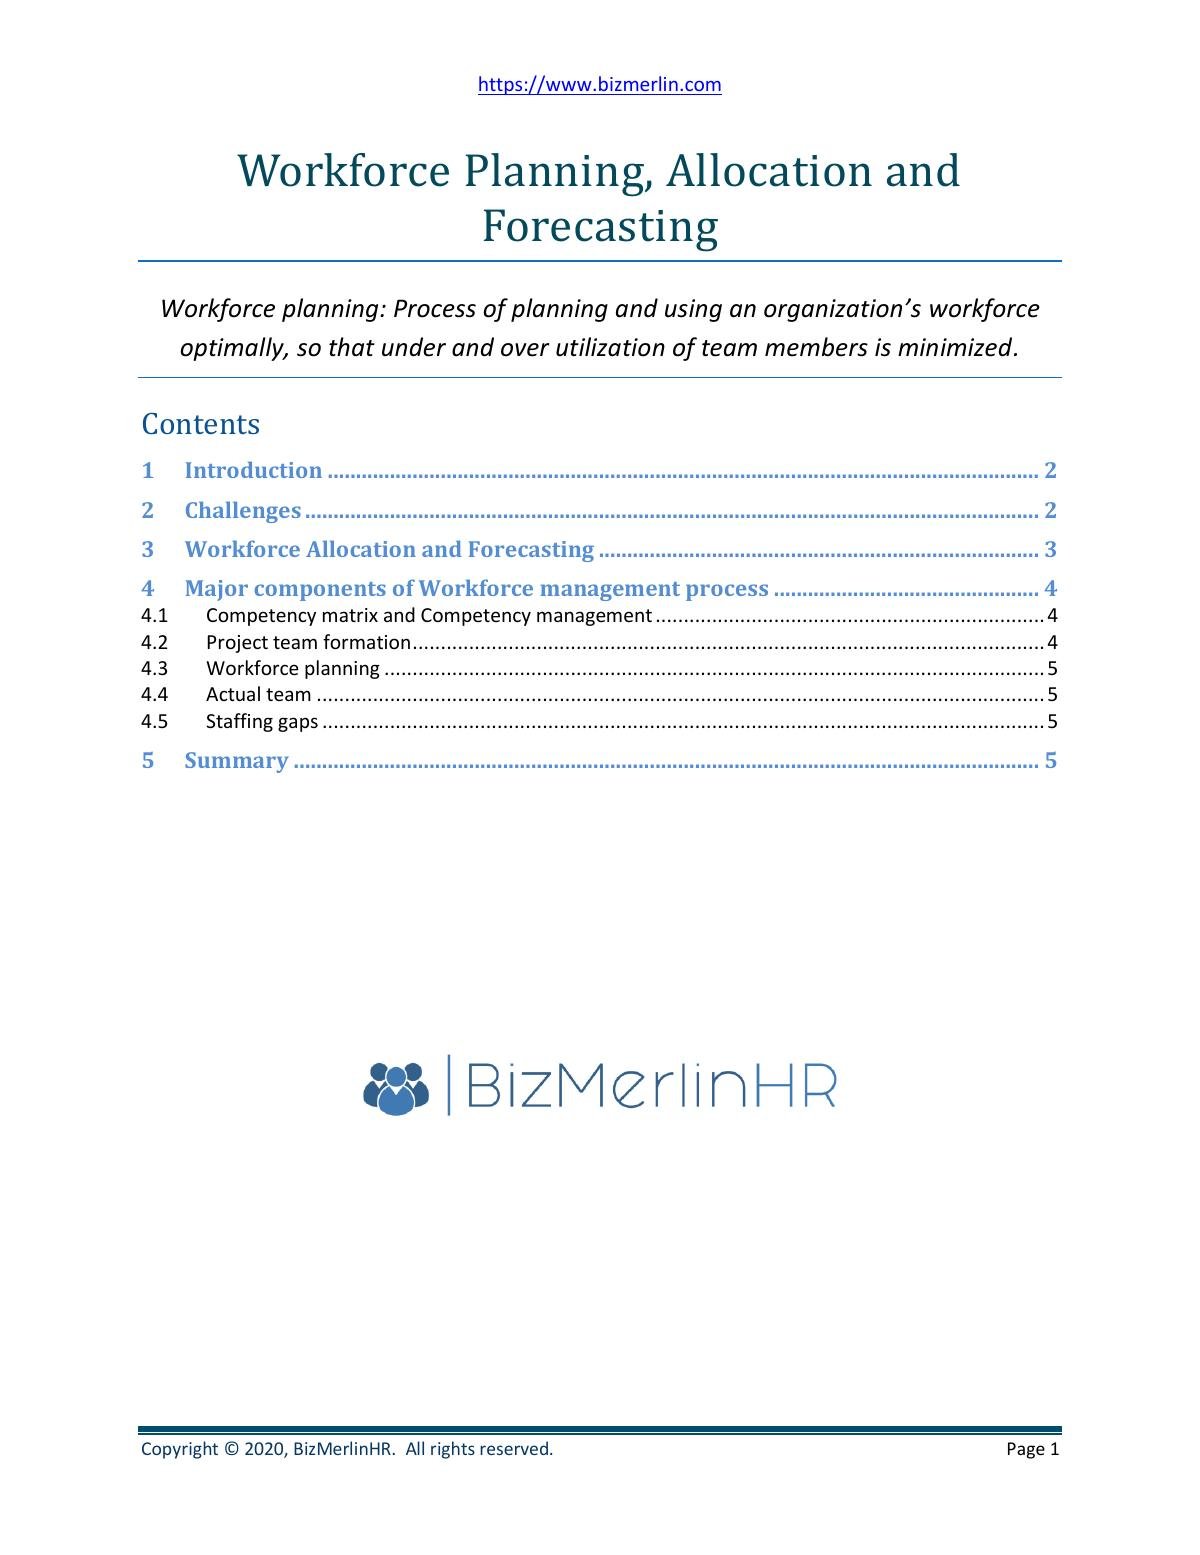 Workforce Planning, Allocation and Forecasting